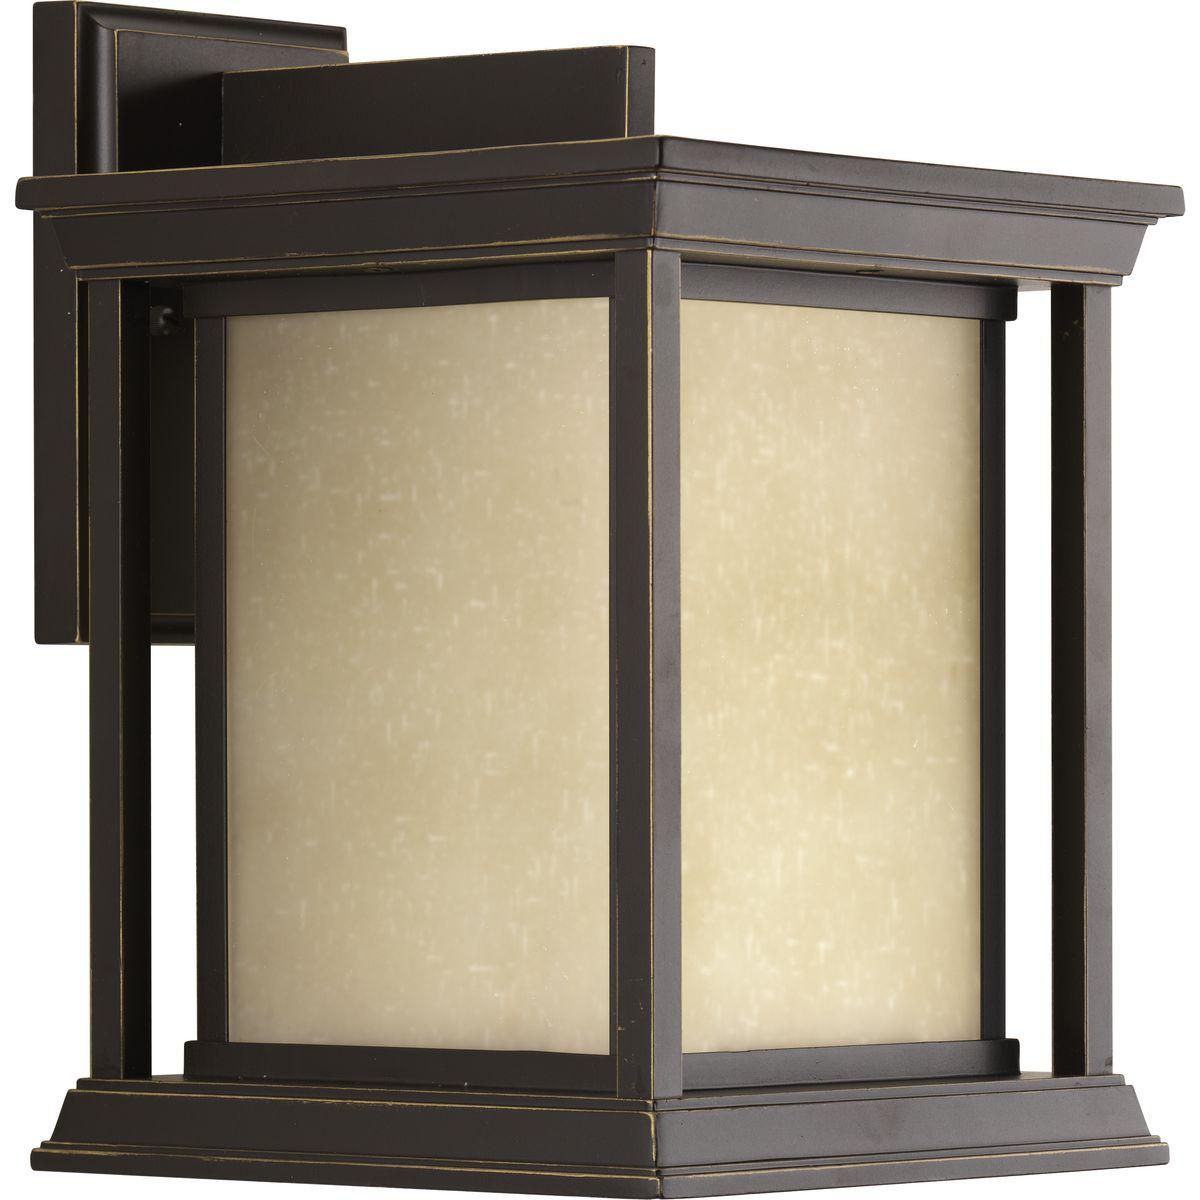 Hubbell P5611-20 One-light large wall lantern with a Craftsman-inspired modern silhouette, Endicott offers visual interest when both lit and unlit. The elongated frame is elegantly finished with linen glass diffuser.  ; Craftsman-inspired modern silhouette. ; Visually app